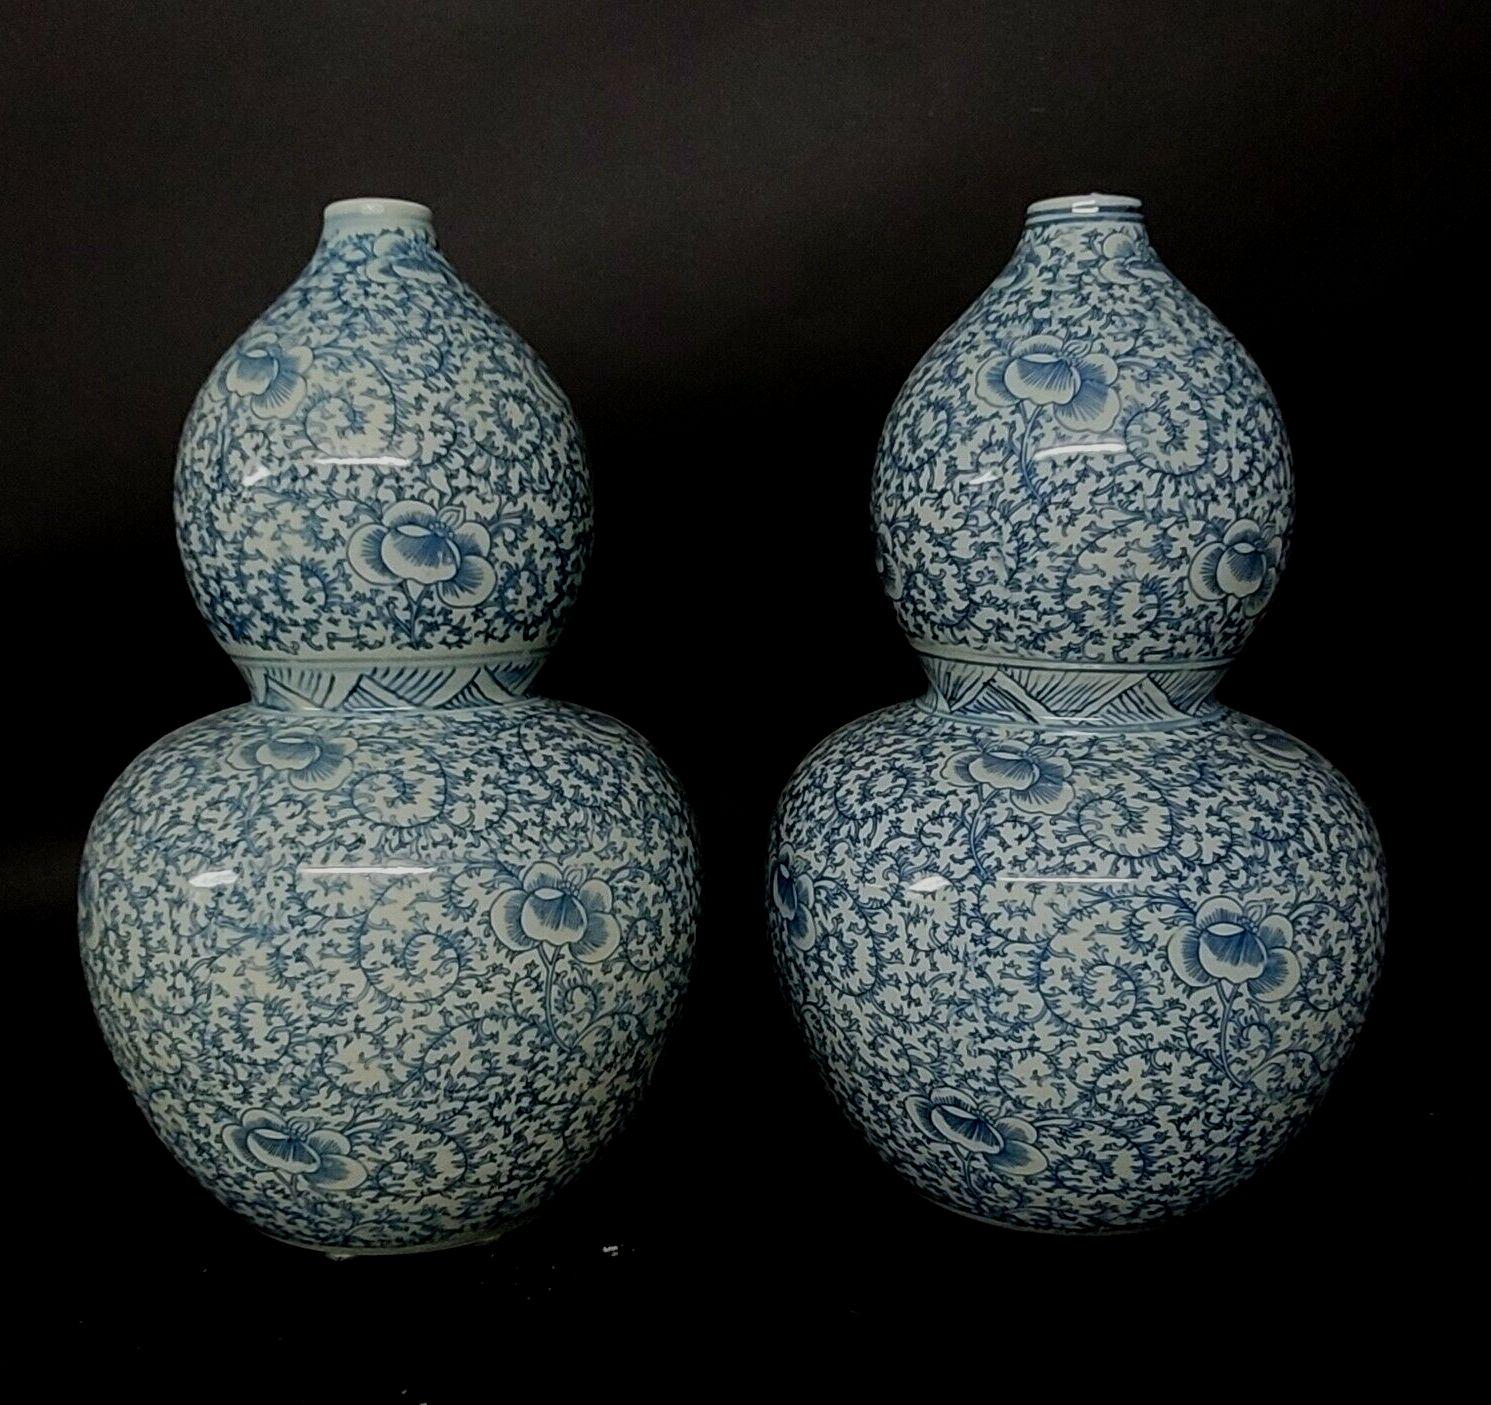 Large pair of blue and white Chinese double gourd vases decorated with flowers and scrolling foliage.

